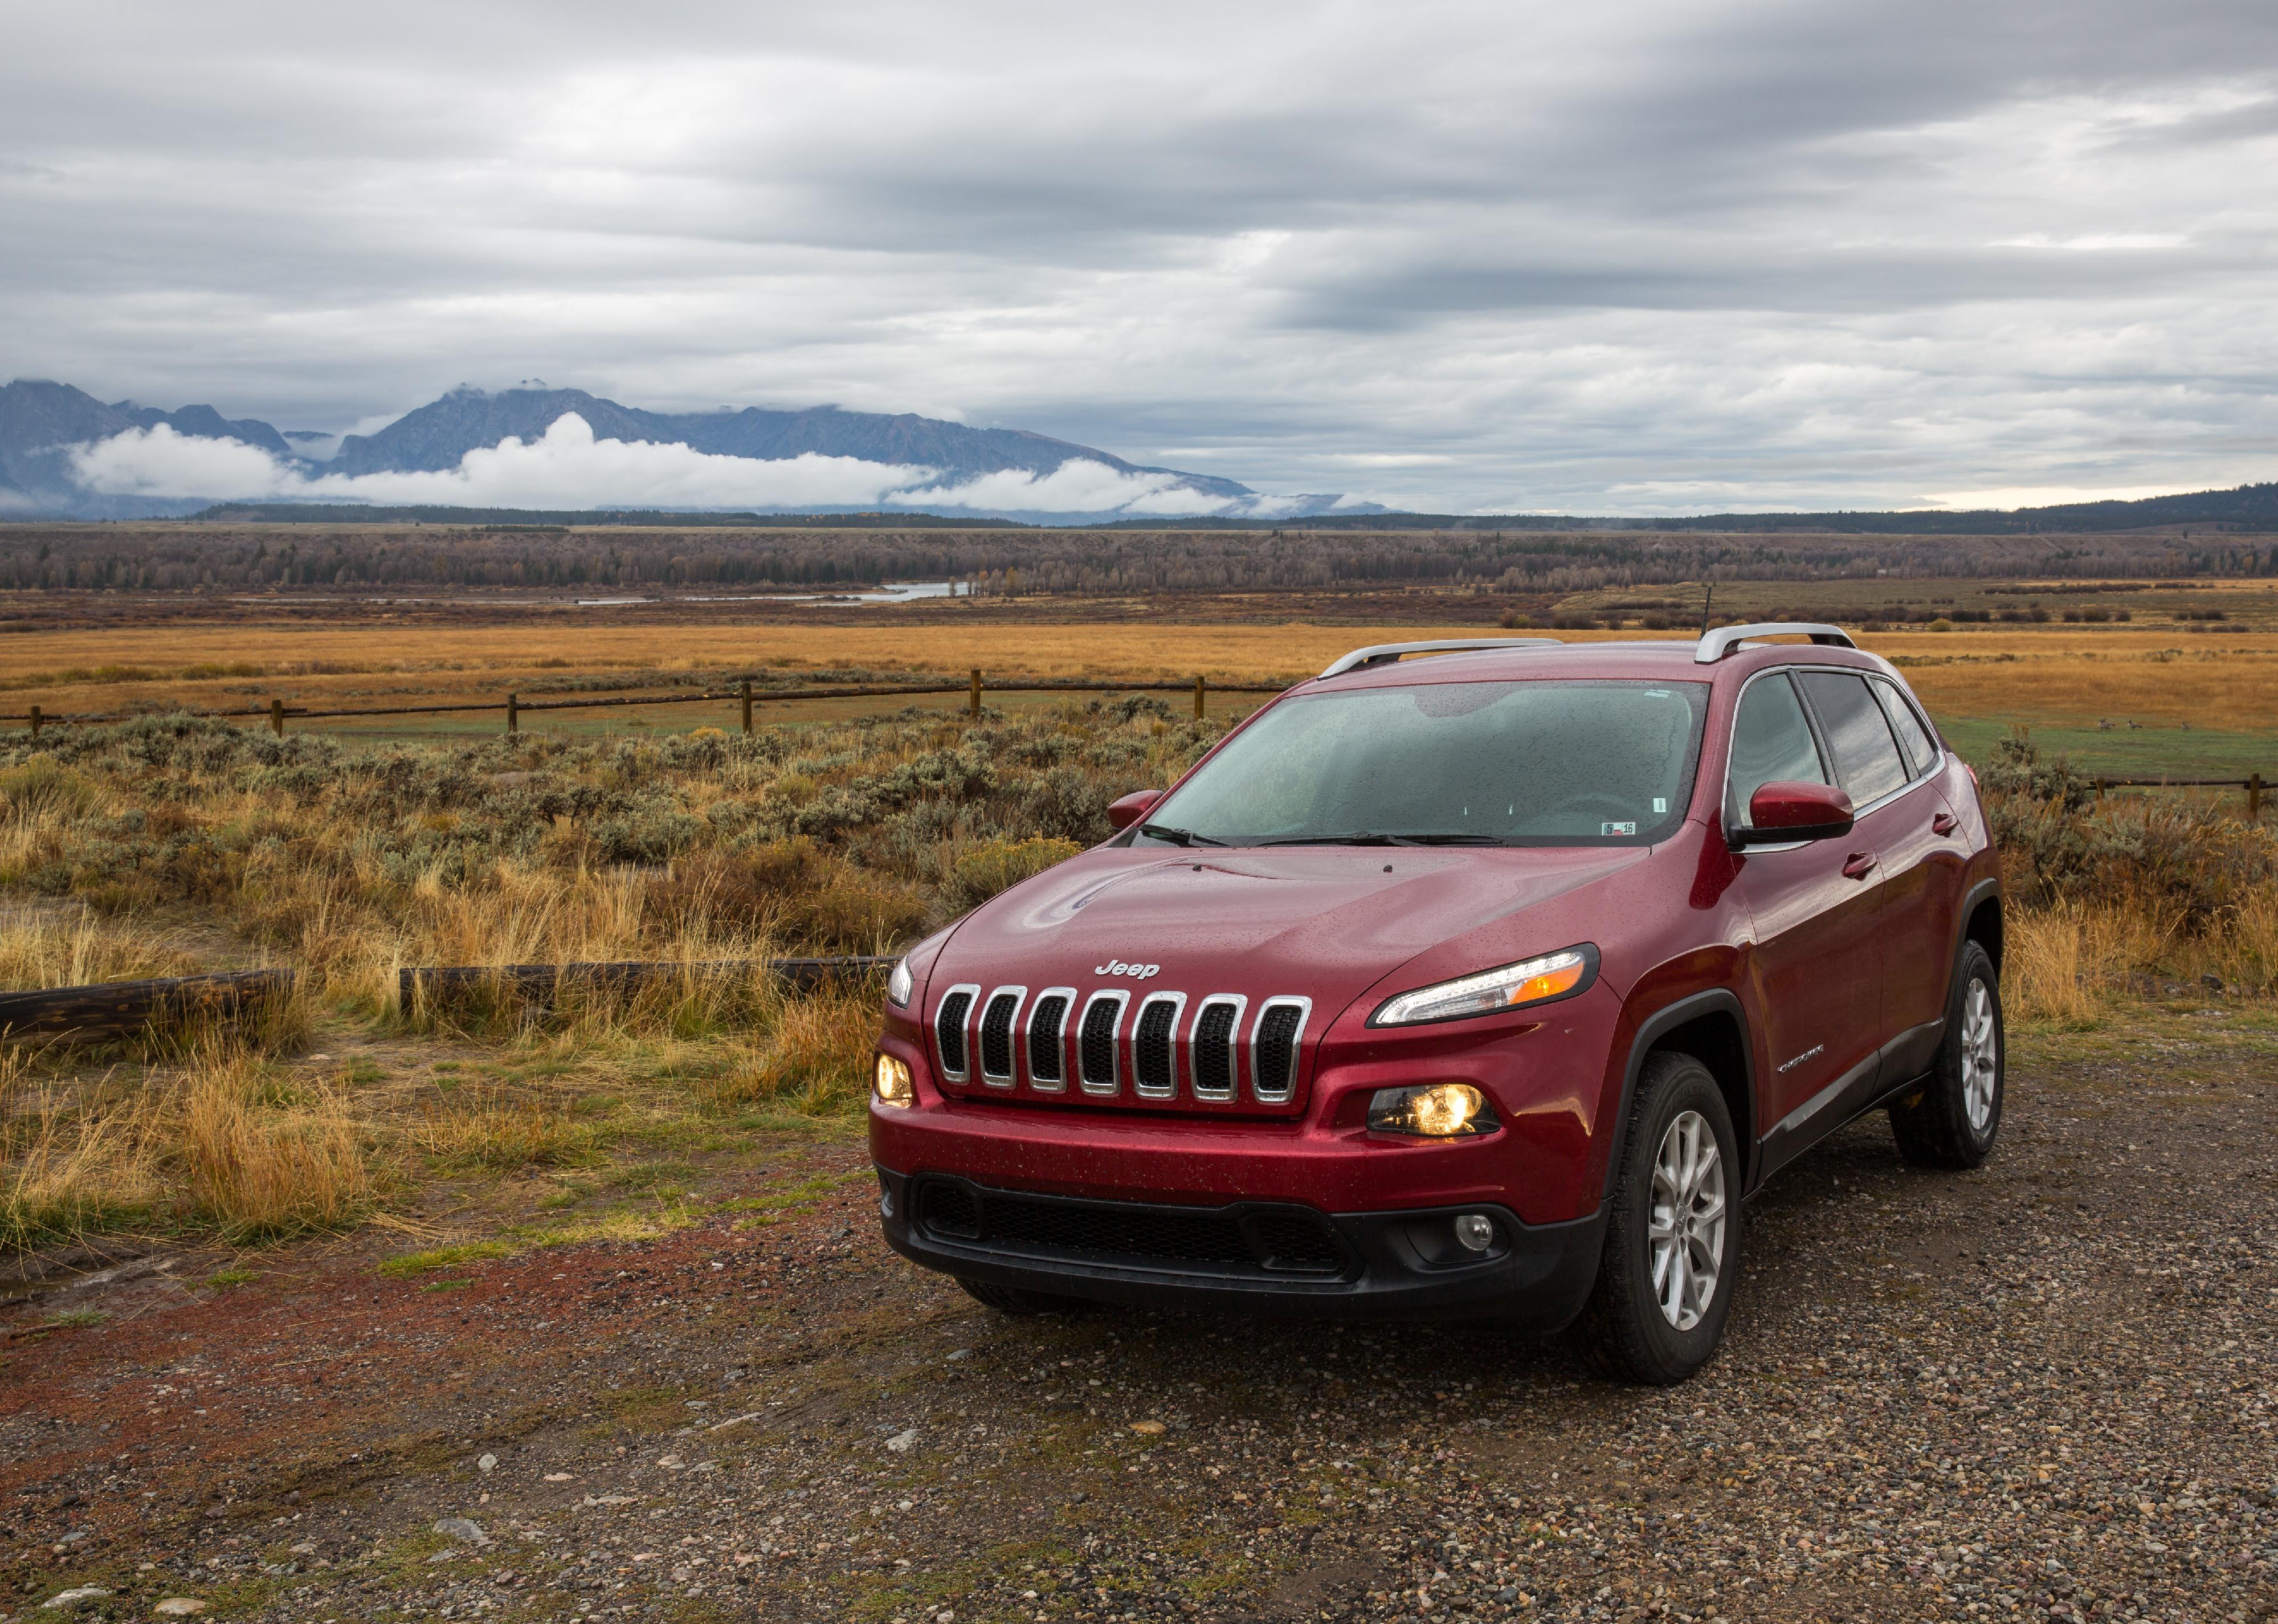 View of a red 2015 Jeep Cherokee outside.